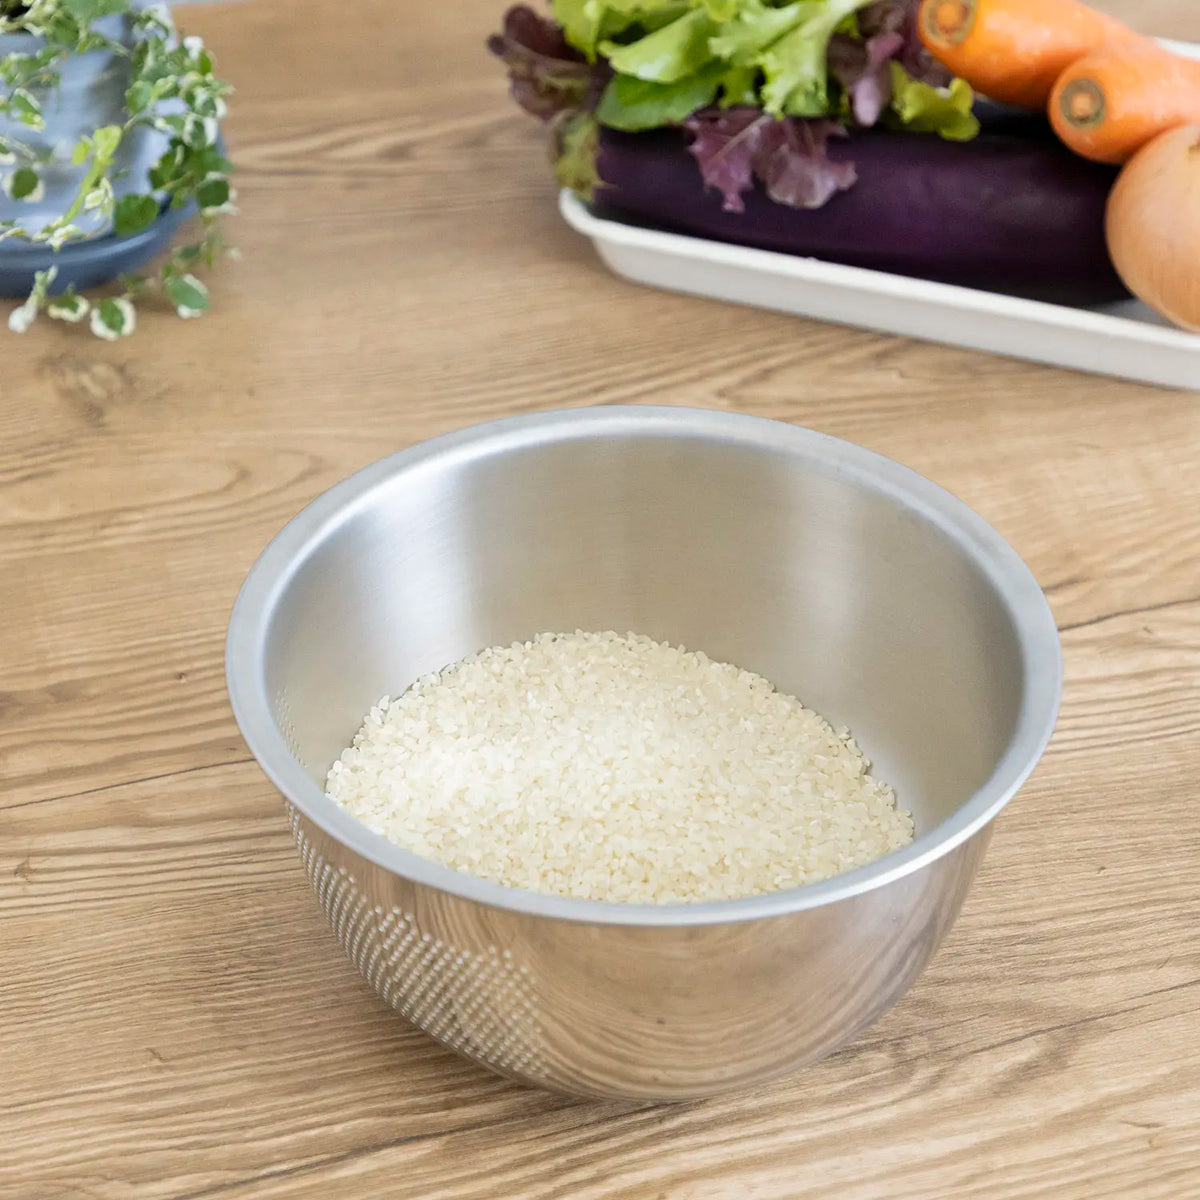 Fujii Stainless Steel 3-Way Rice Washing Bowl with Perforated Strainer 21.5cm